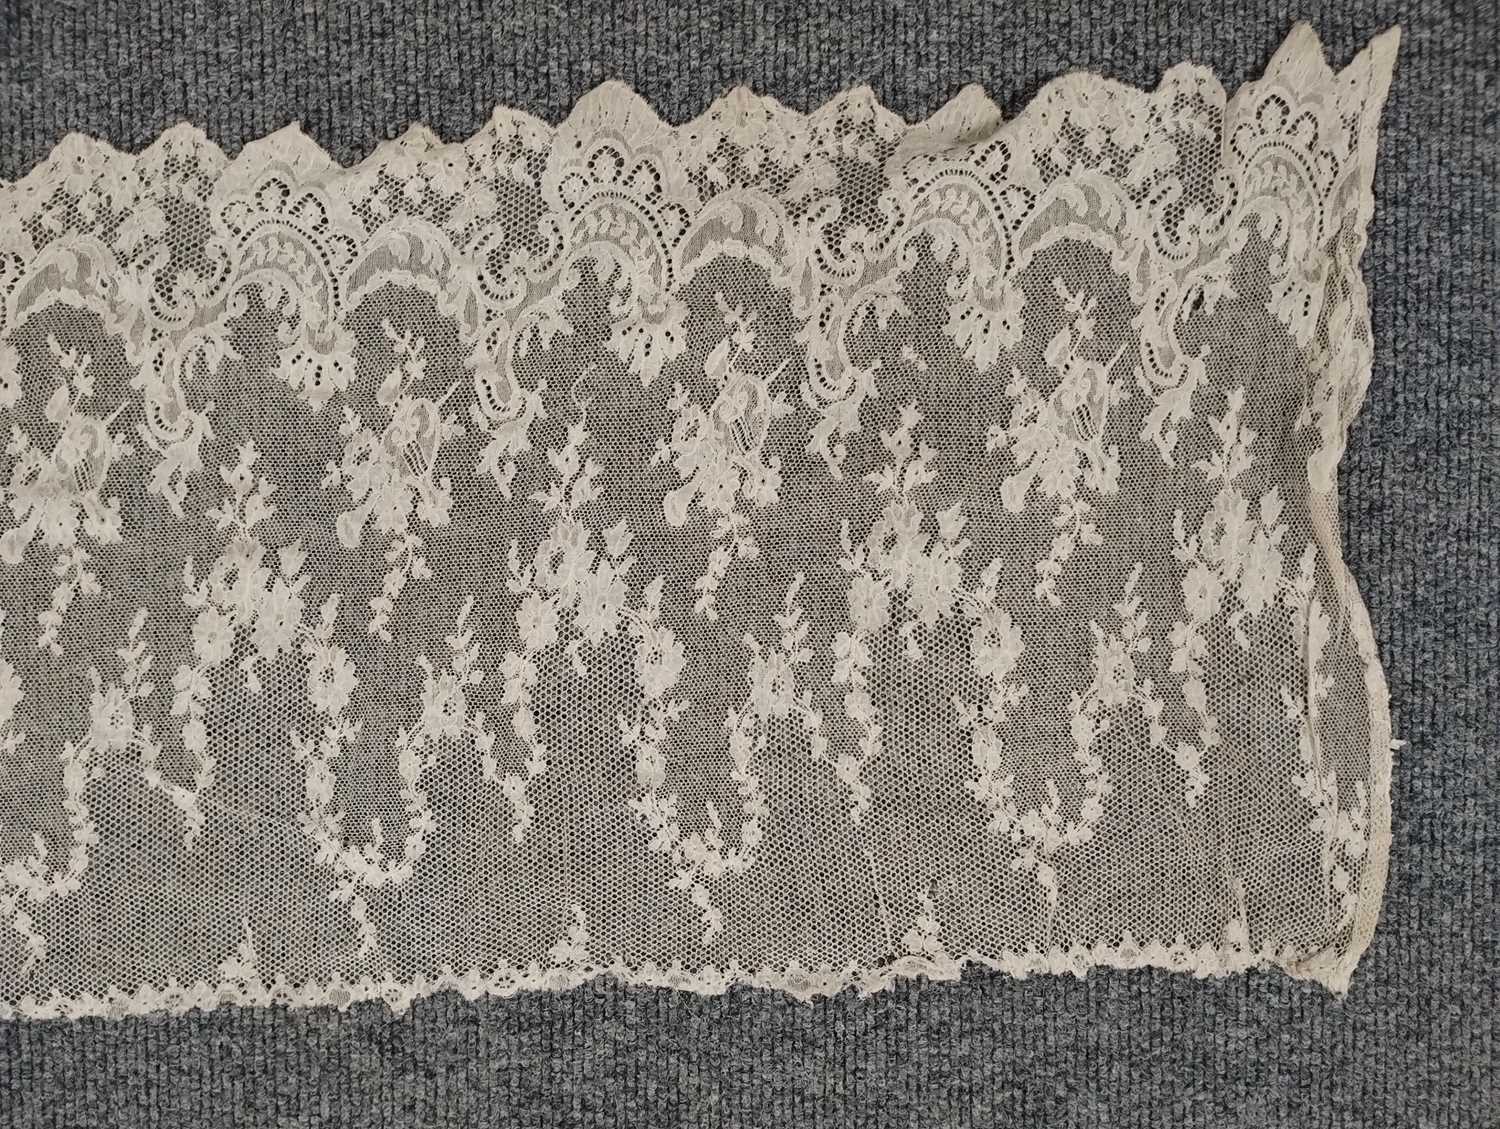 Early 20th Century Lace comprising a flounce with appliquéd flower heads and motifs within a - Image 6 of 32